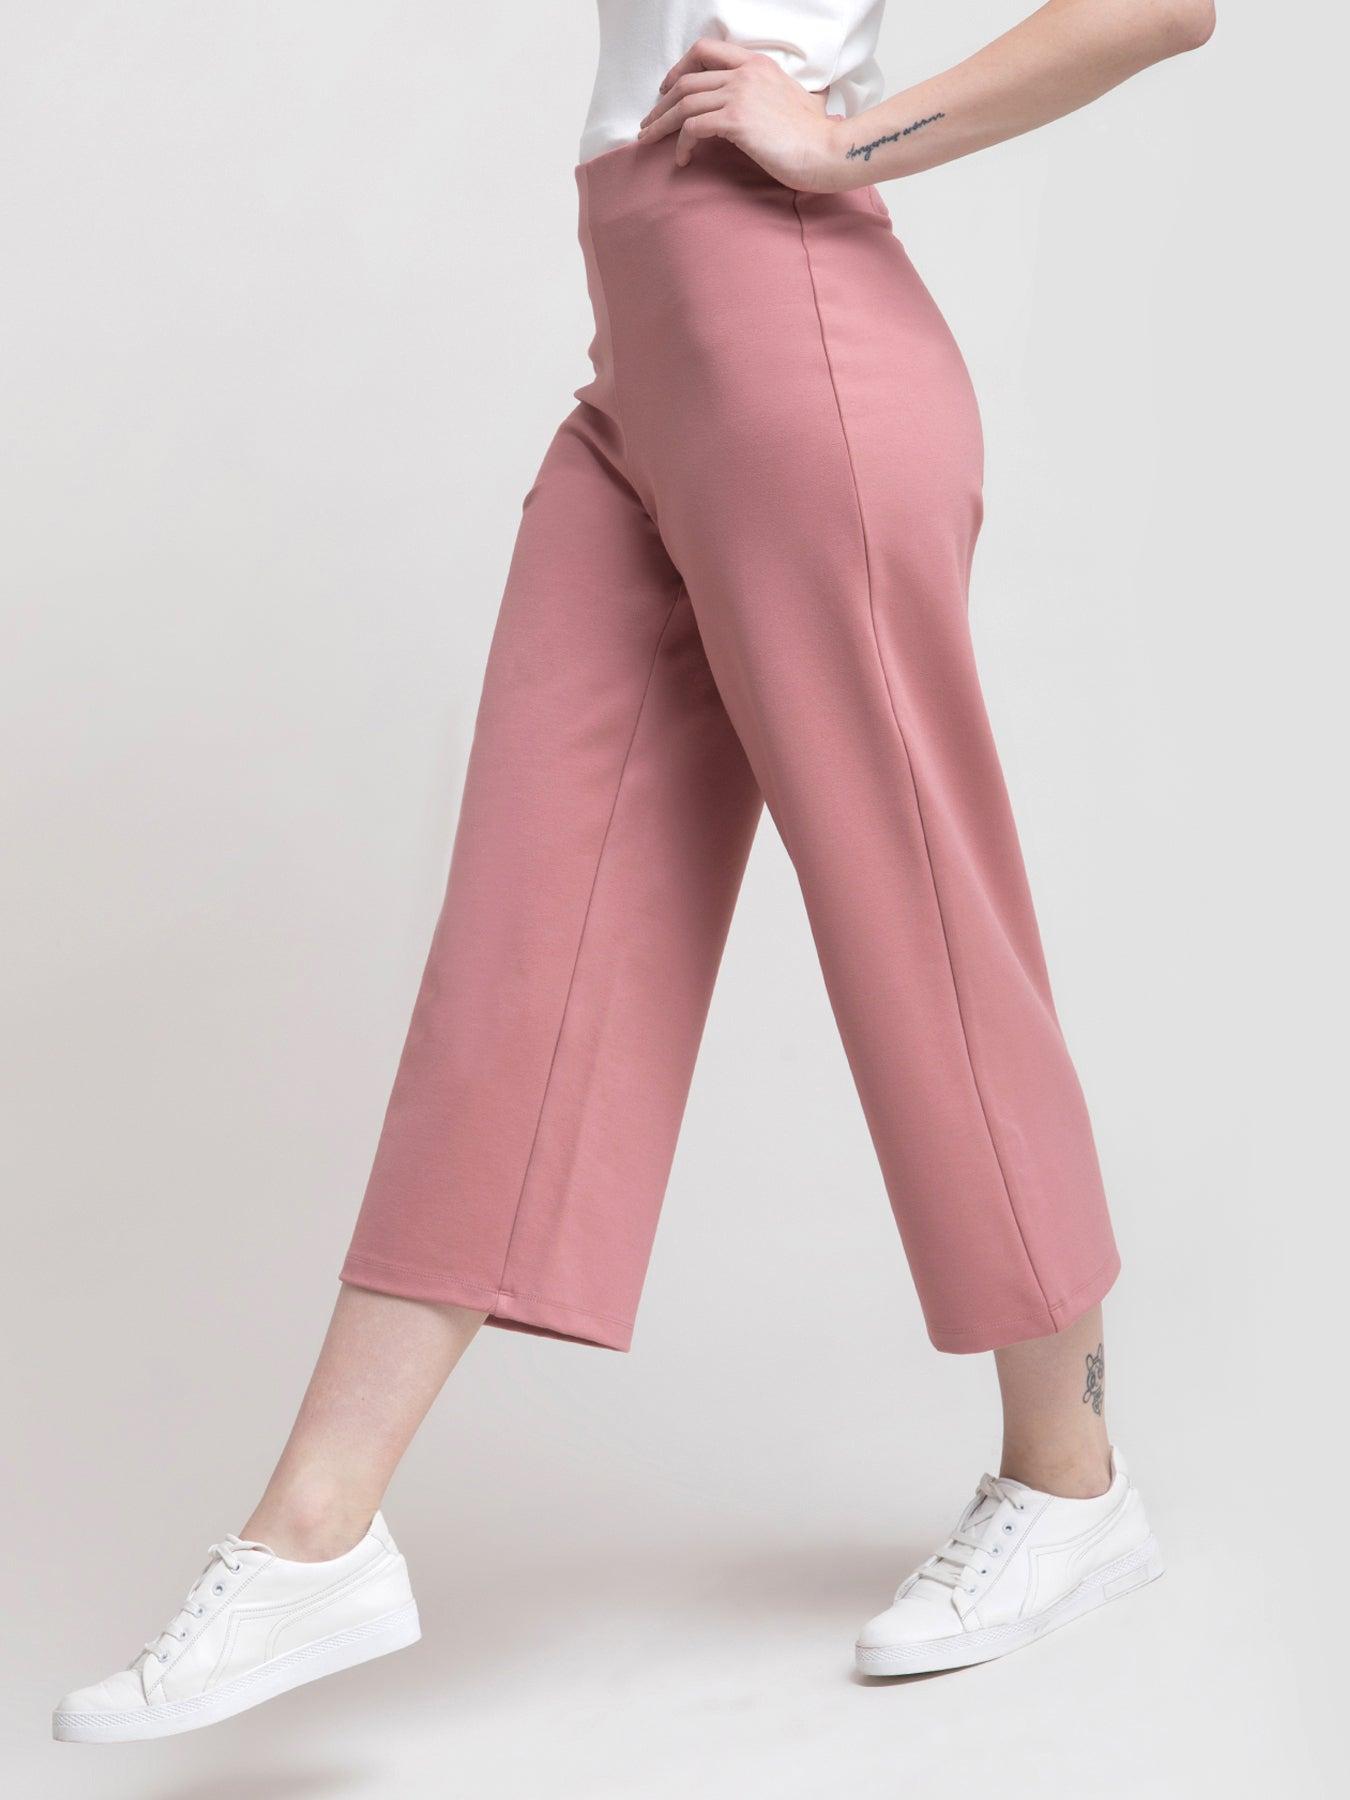 4 Way Stretch LivIn Culottes - Pink| Formal Trousers